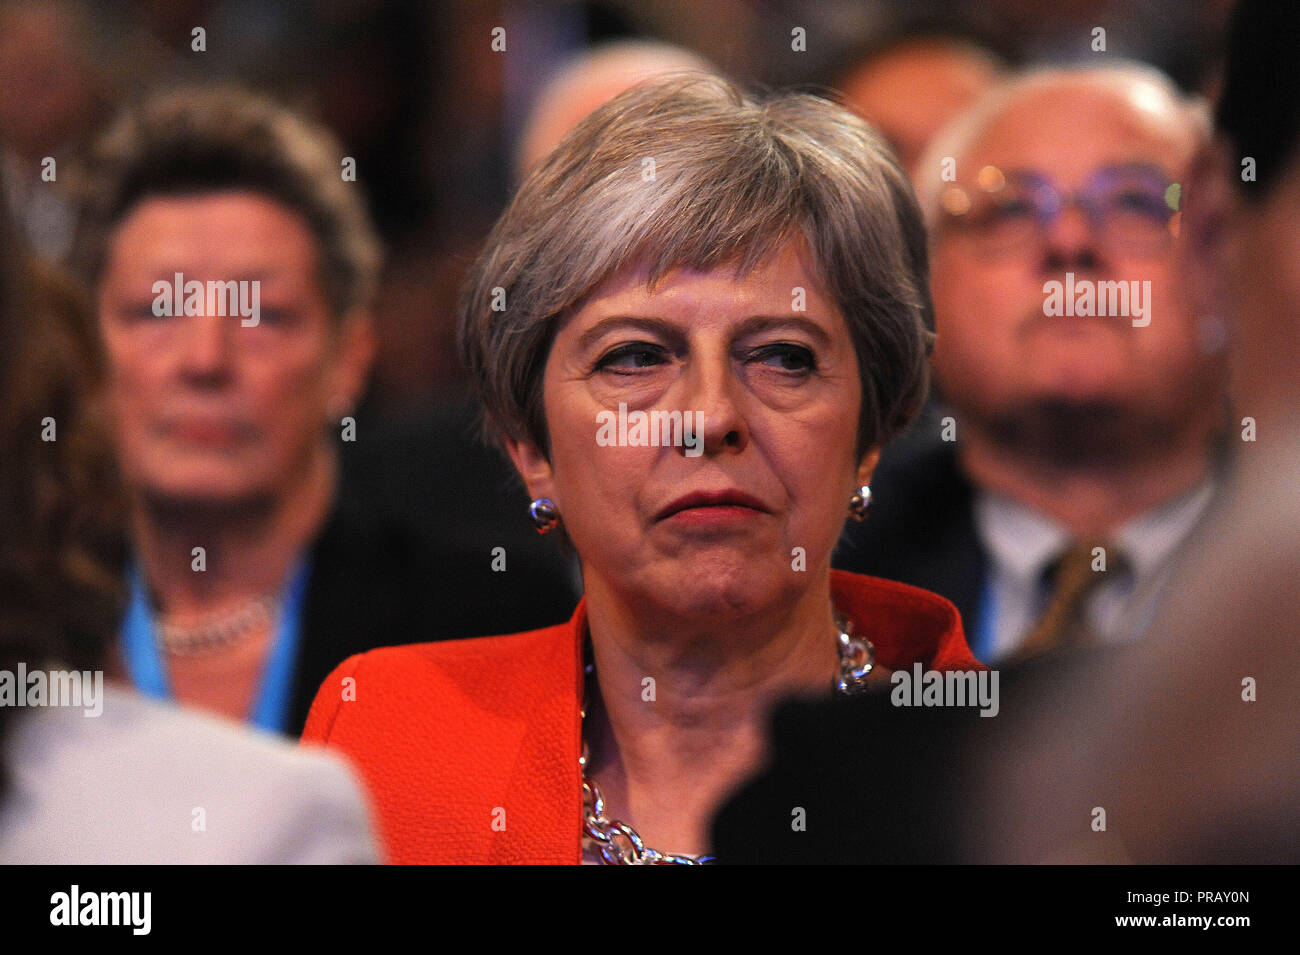 Birmingham, England. 30th September, 2018.  Theresa May MP, Prime Minister and Leader of the Conservative Party, listening to opening speeches to conference on the first session of the first day of the Conservative Party annual conference at the ICC.  Kevin Hayes/Alamy Live News Stock Photo